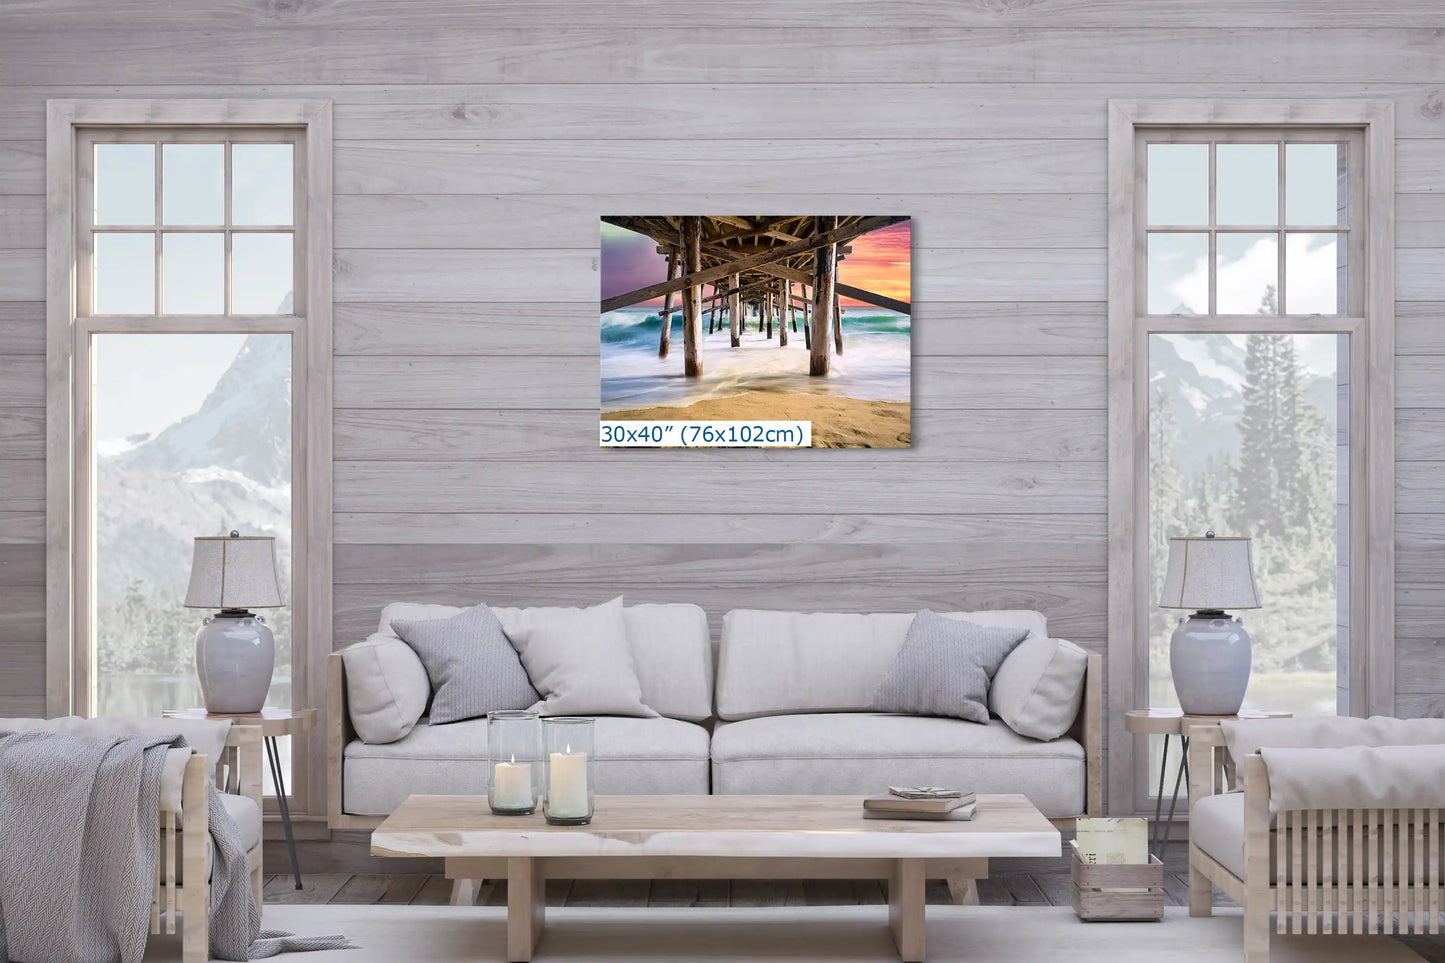 Spacious living room with a 30x40 canvas of the Balboa Pier at sunset, adding a touch of coastal serenity to the home.